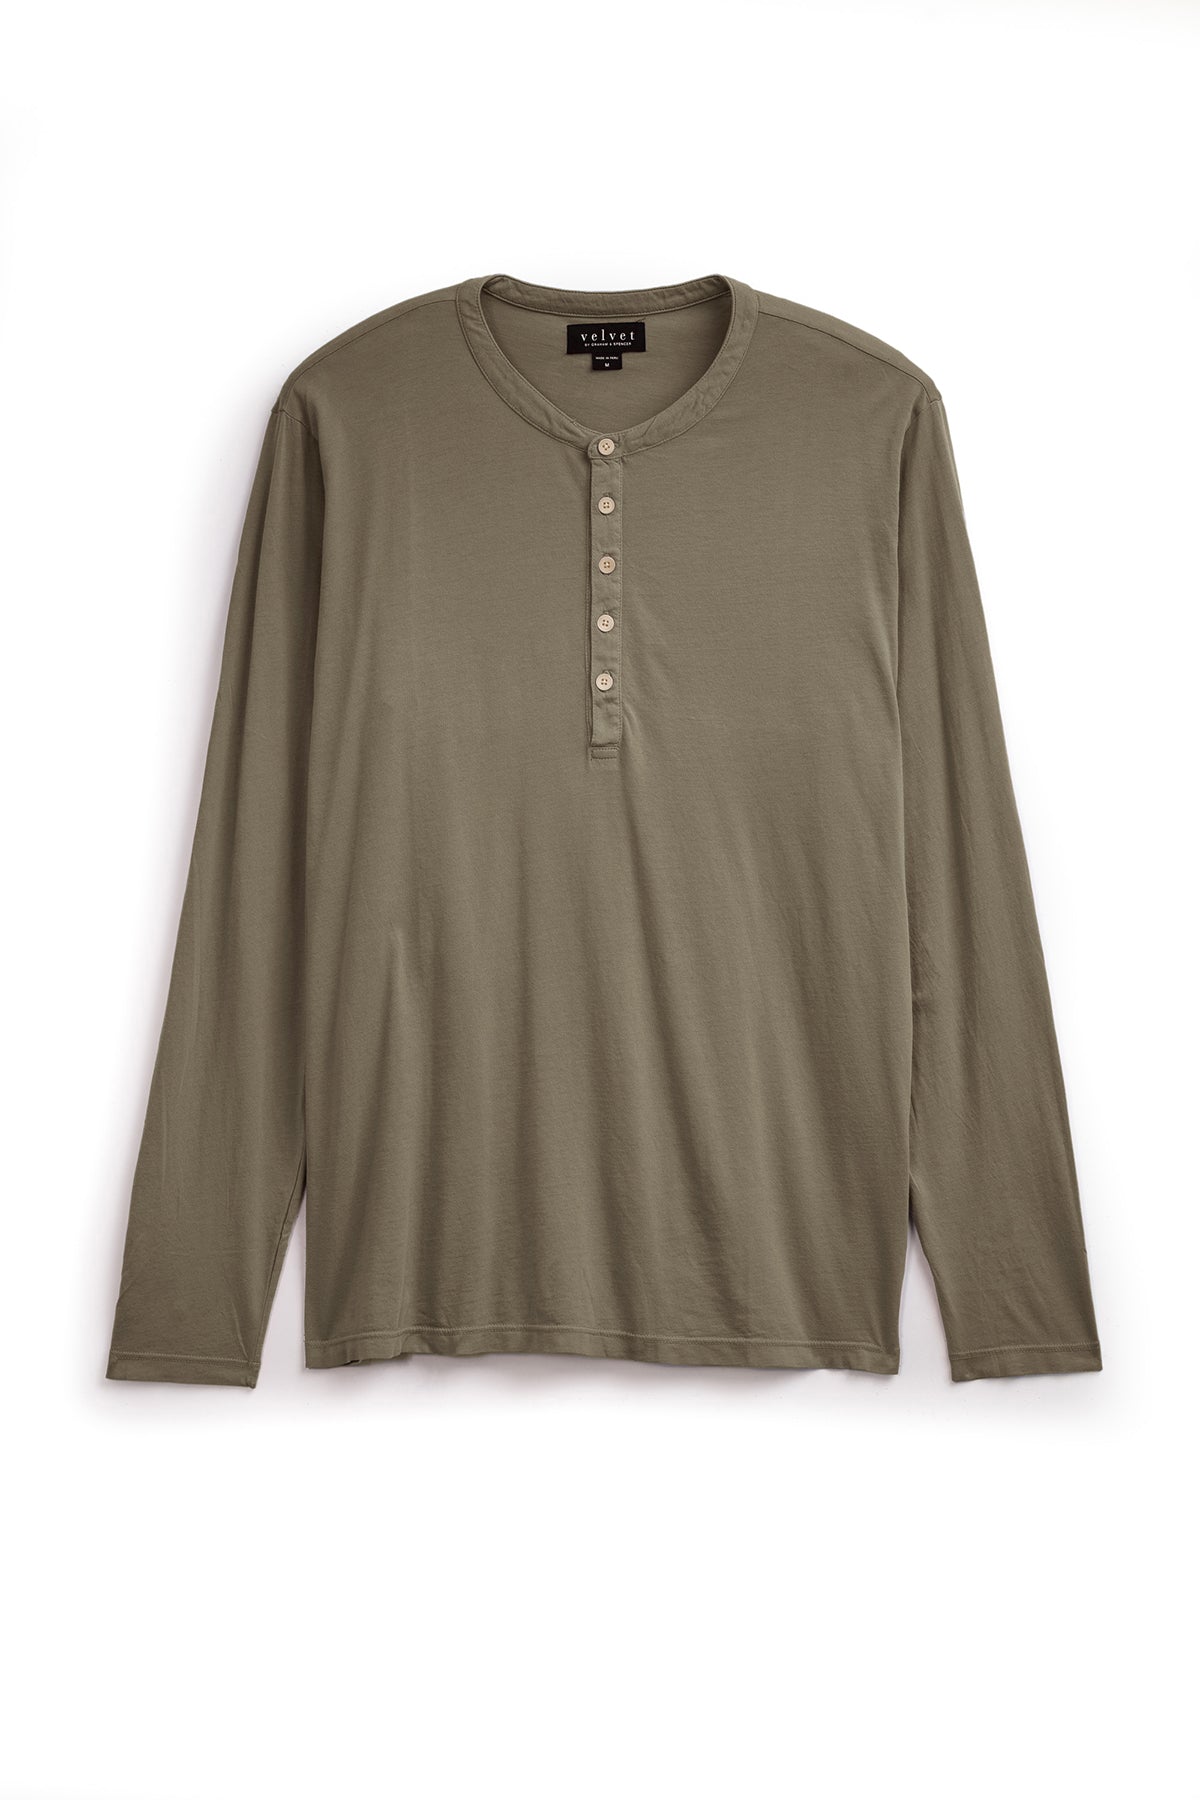   Olive green ALVARO COTTON JERSEY HENLEY shirt by Velvet by Graham & Spencer with a vintage-look displayed flat against a white background. 